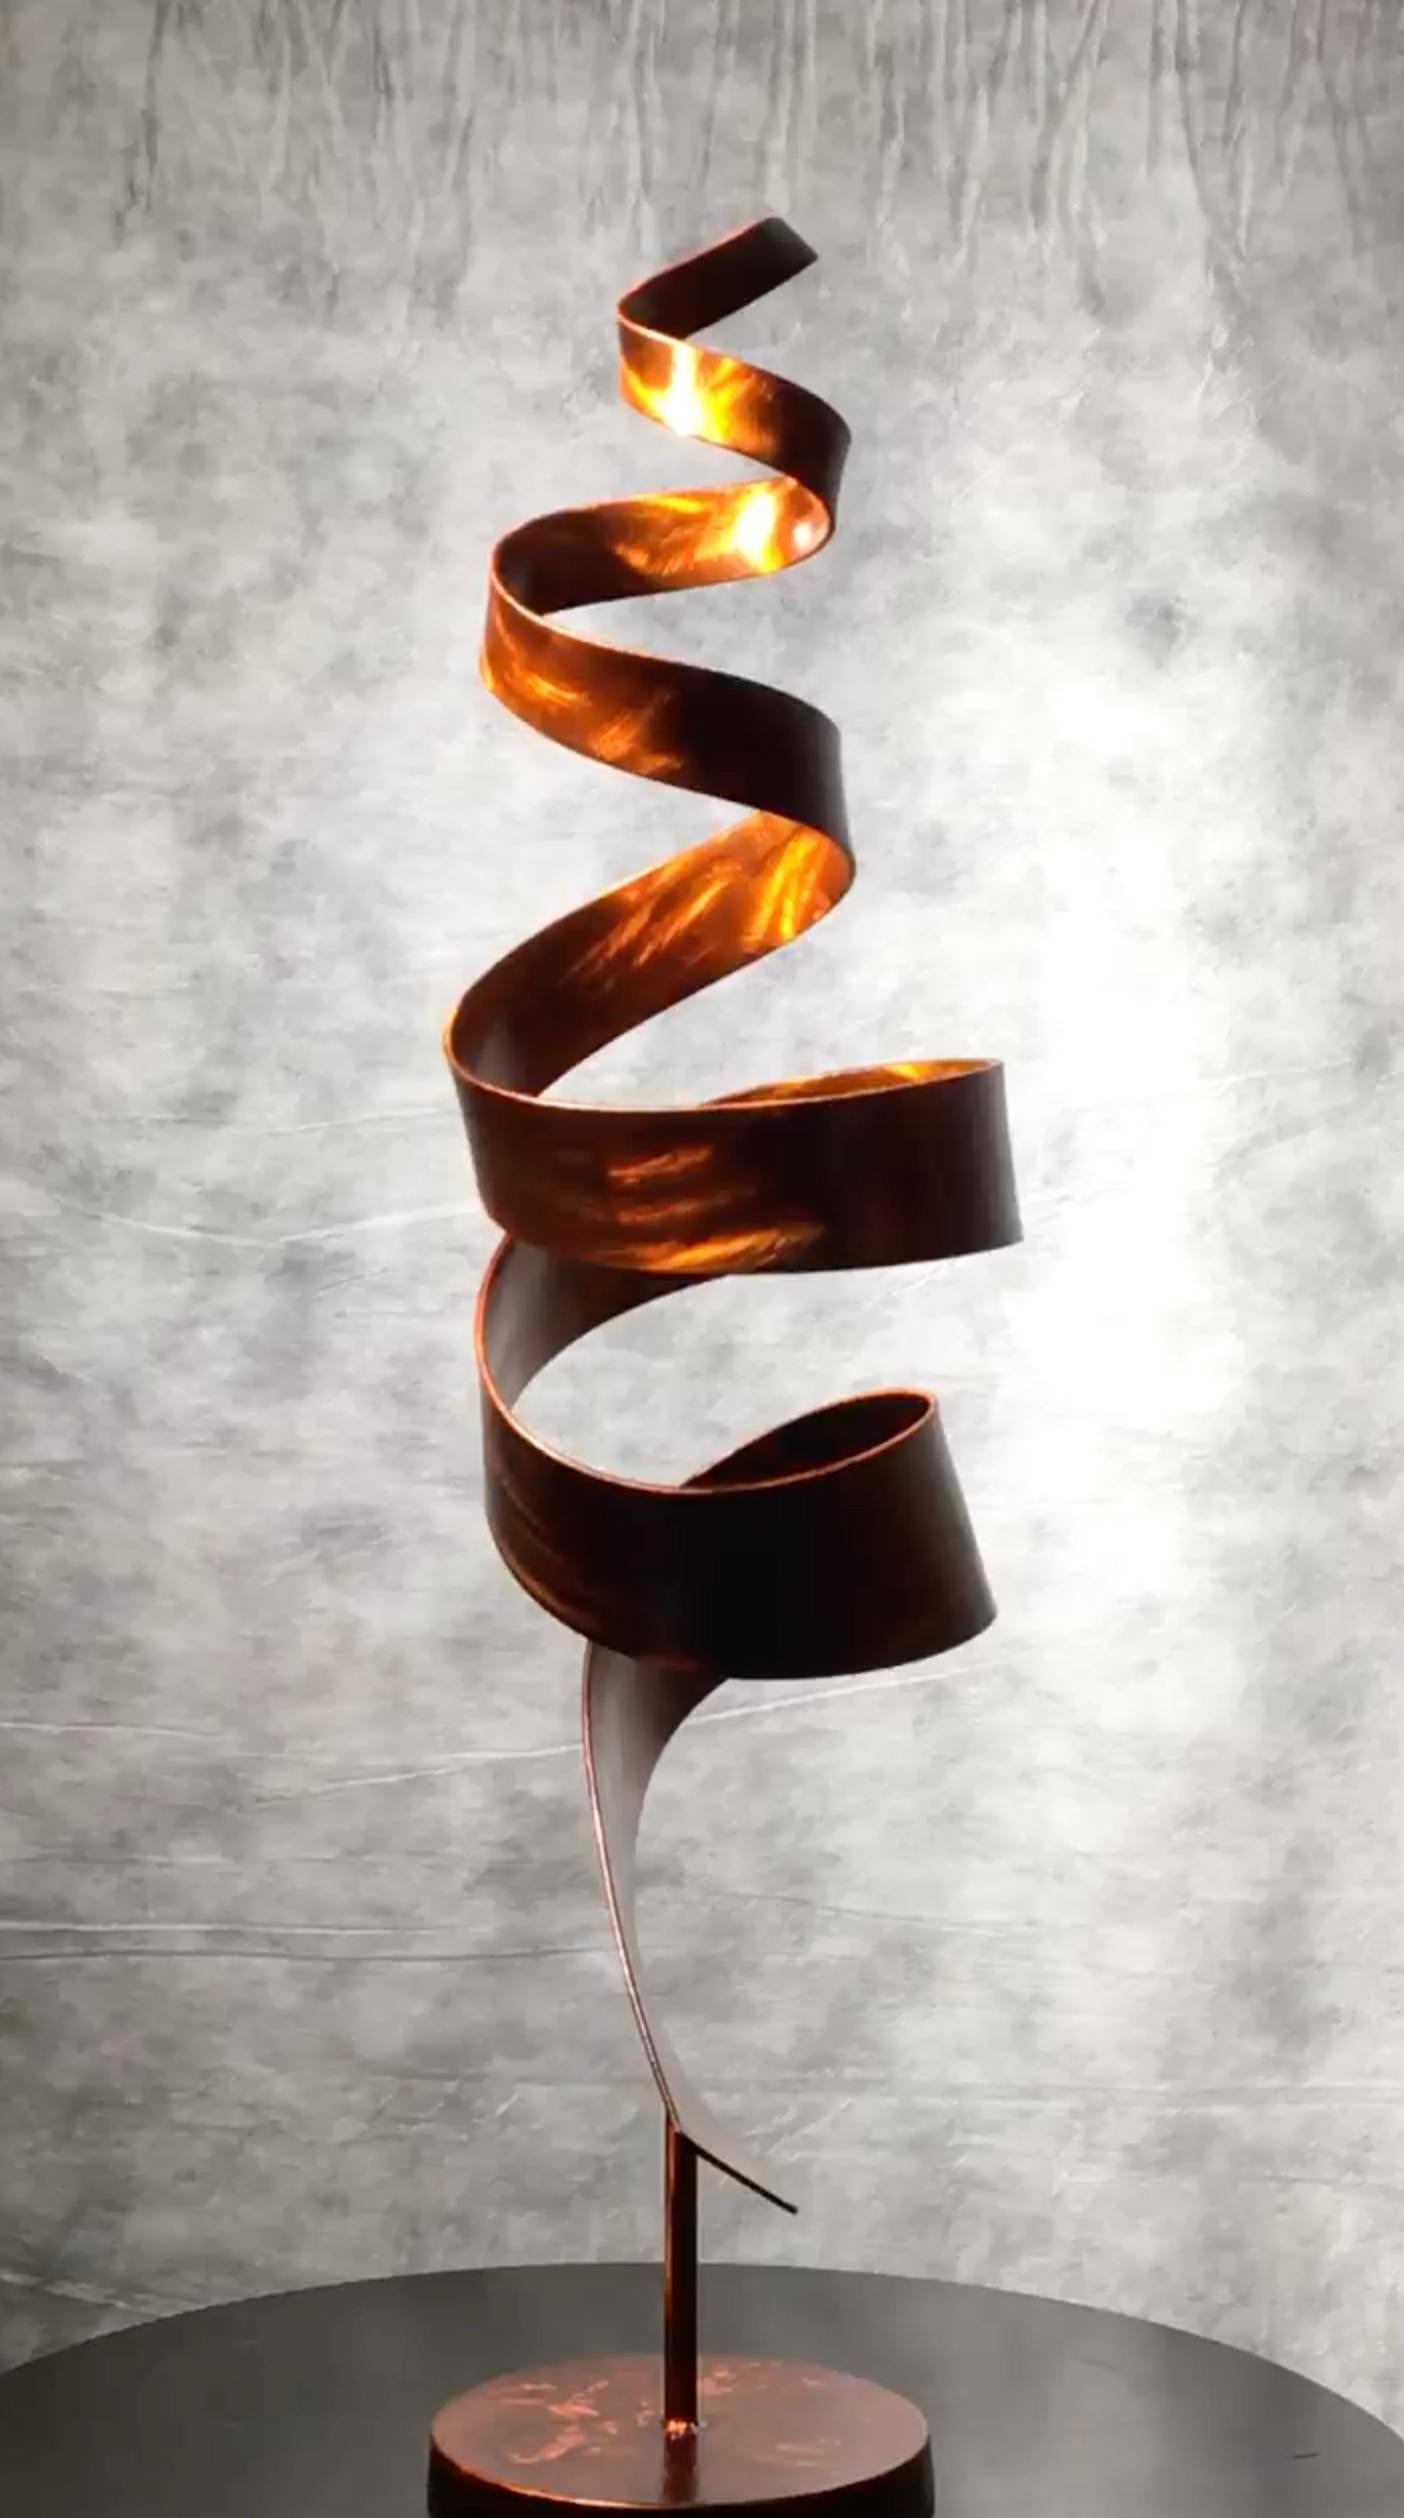 Orange Skyline is an abstract sculpture by Joe Sorge, made from stainless steel with an orange dye and clear coat. The white pedestal pictured beneath the sculpture base is not included. 

Connecticut sculptor Joe Sorge says about his work, 